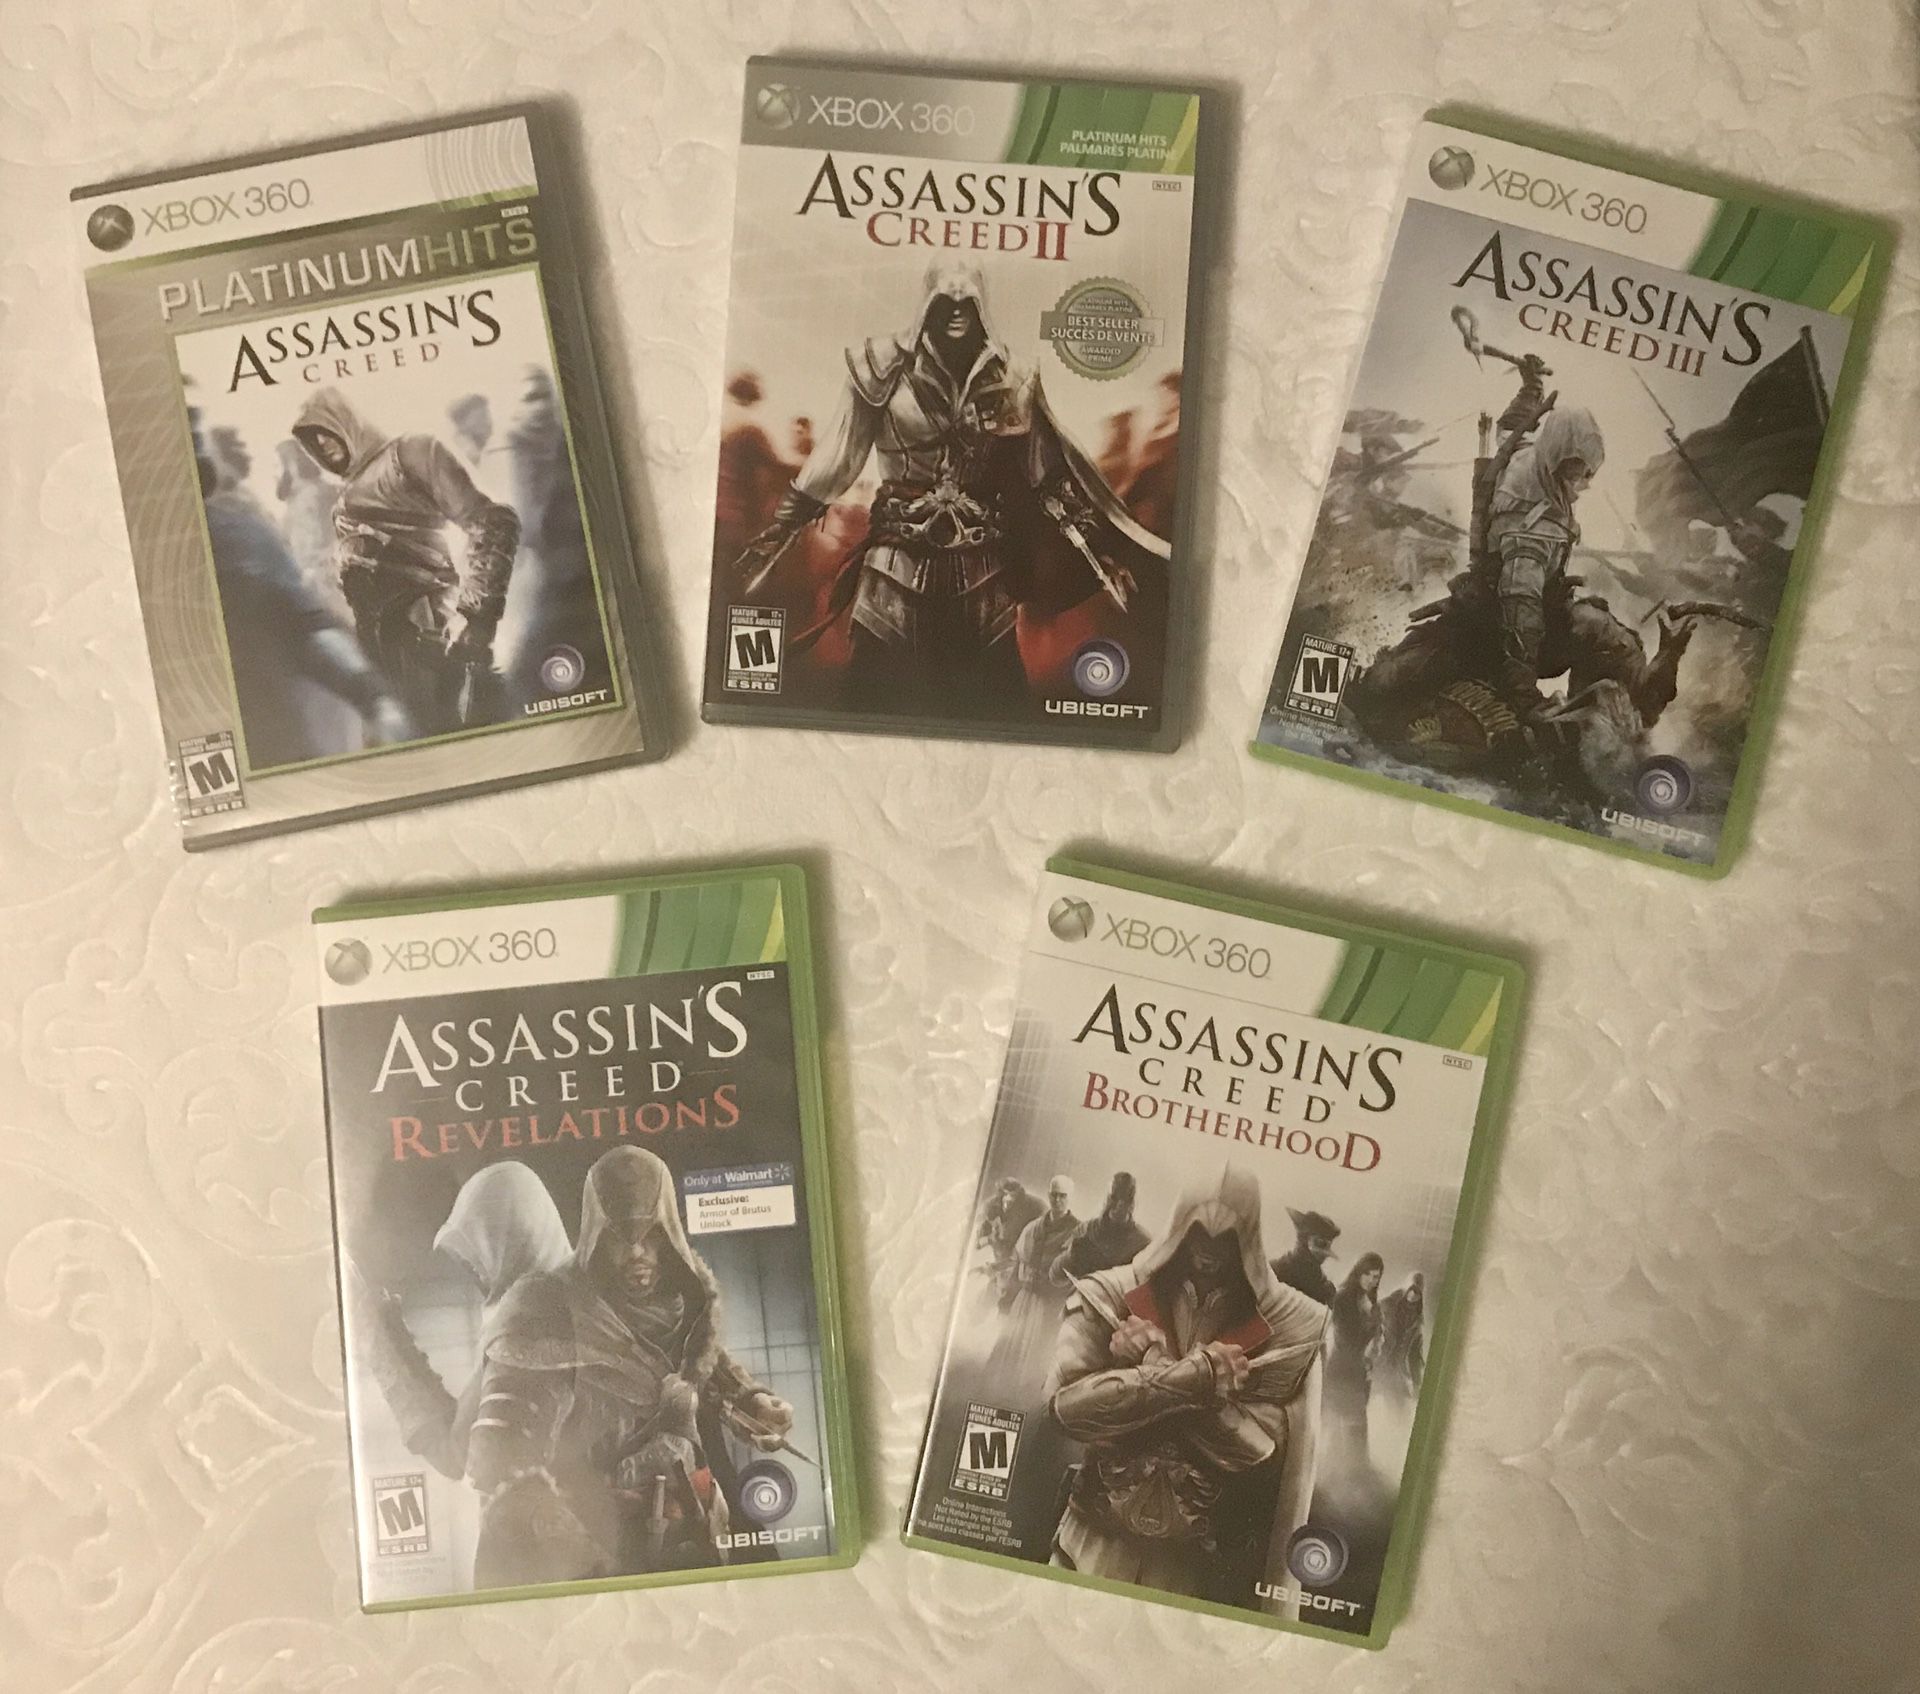 5 Assassins Creed games for Xbox 360